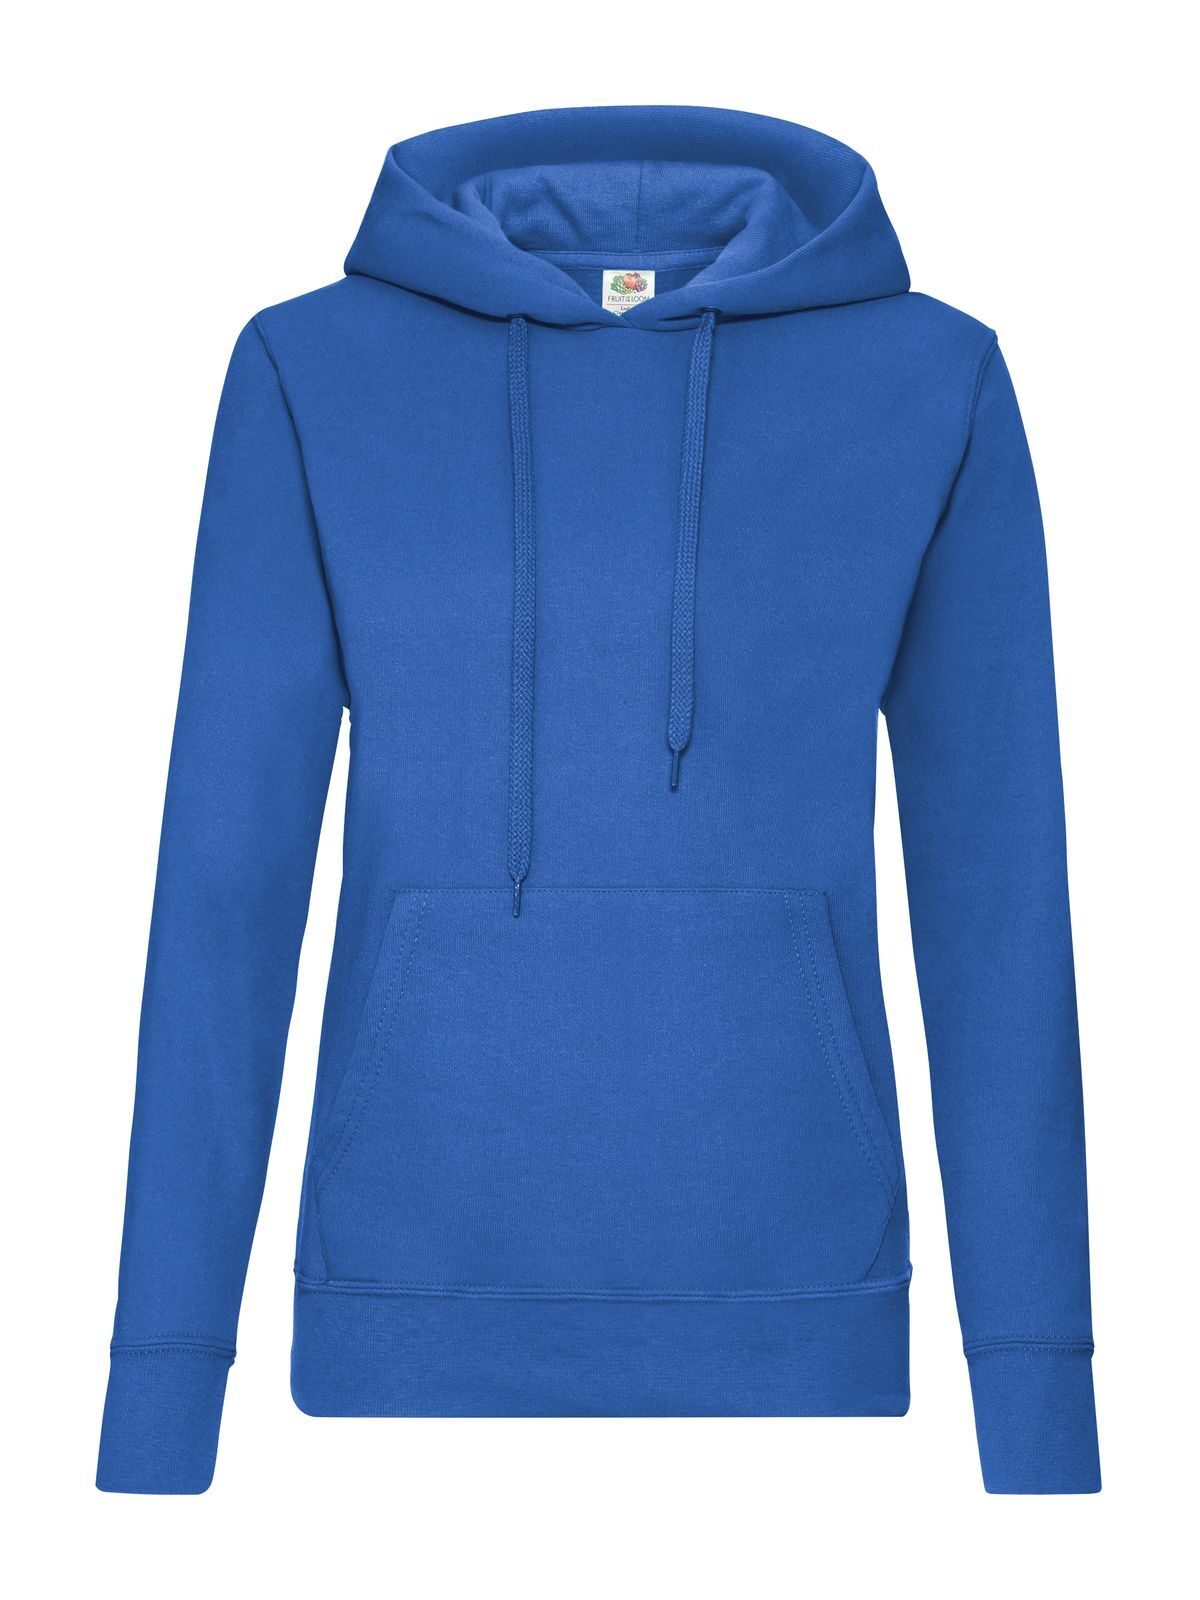 Pittogramma Ladies Classic Hooded Sweat - FR620380 royal blue